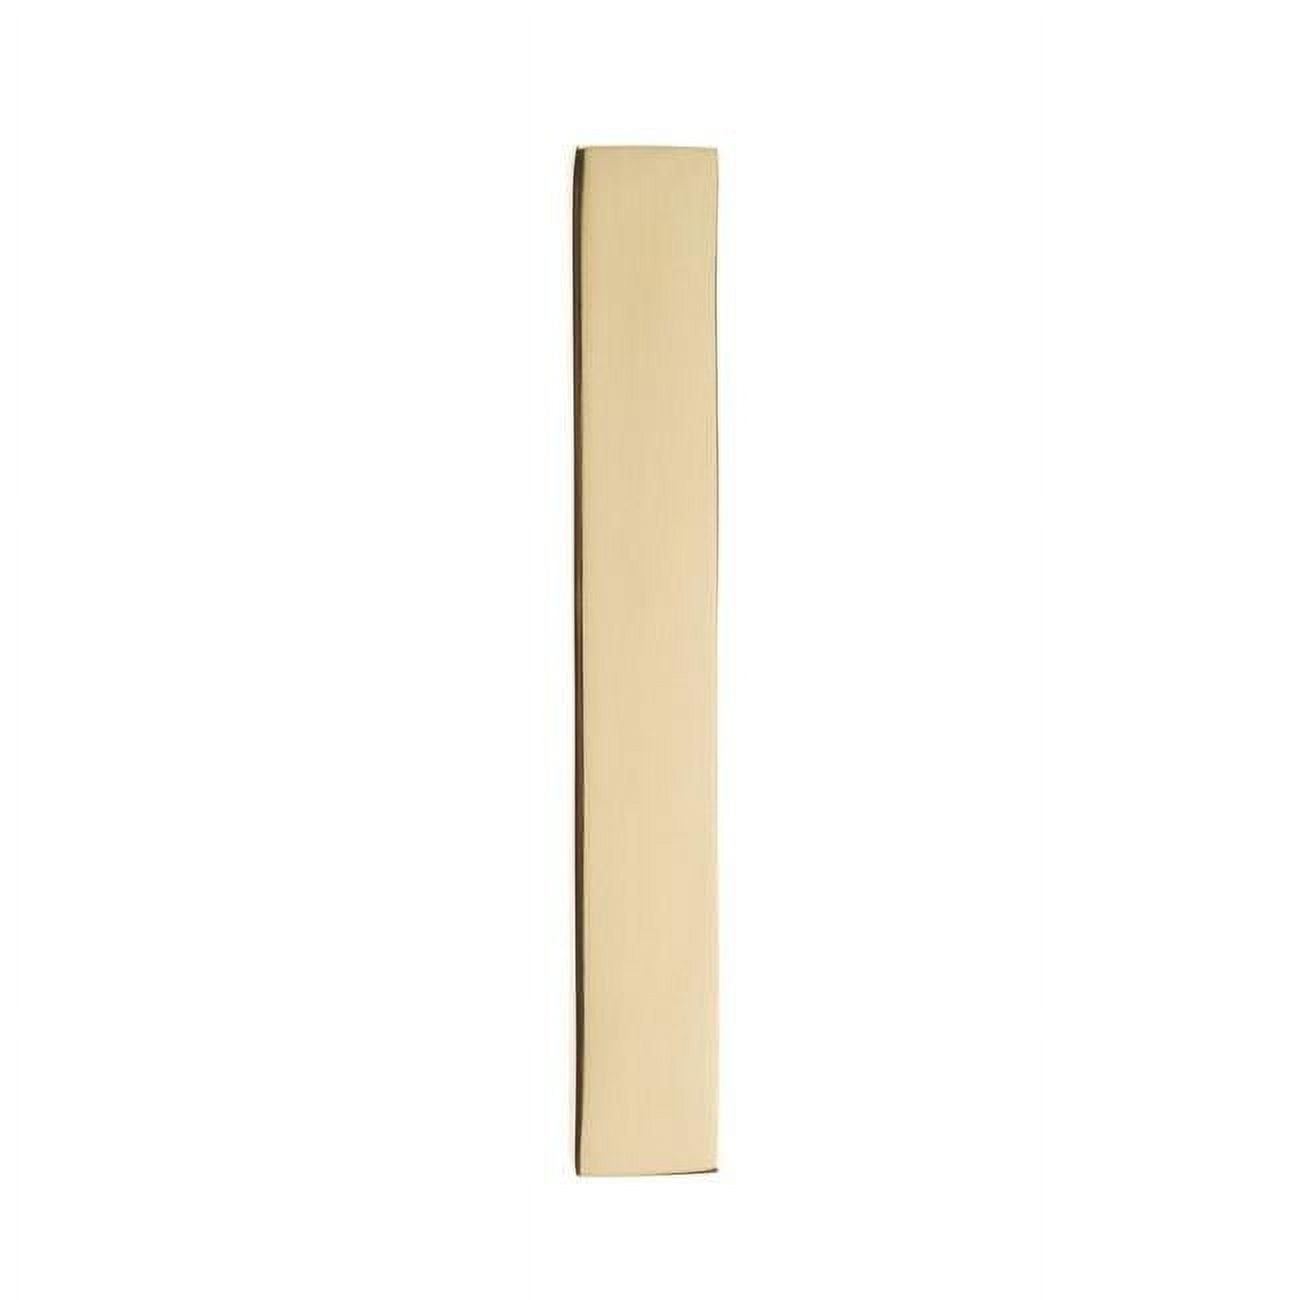 3585pb-1 House Number 1, Polished Brass - 5 In.